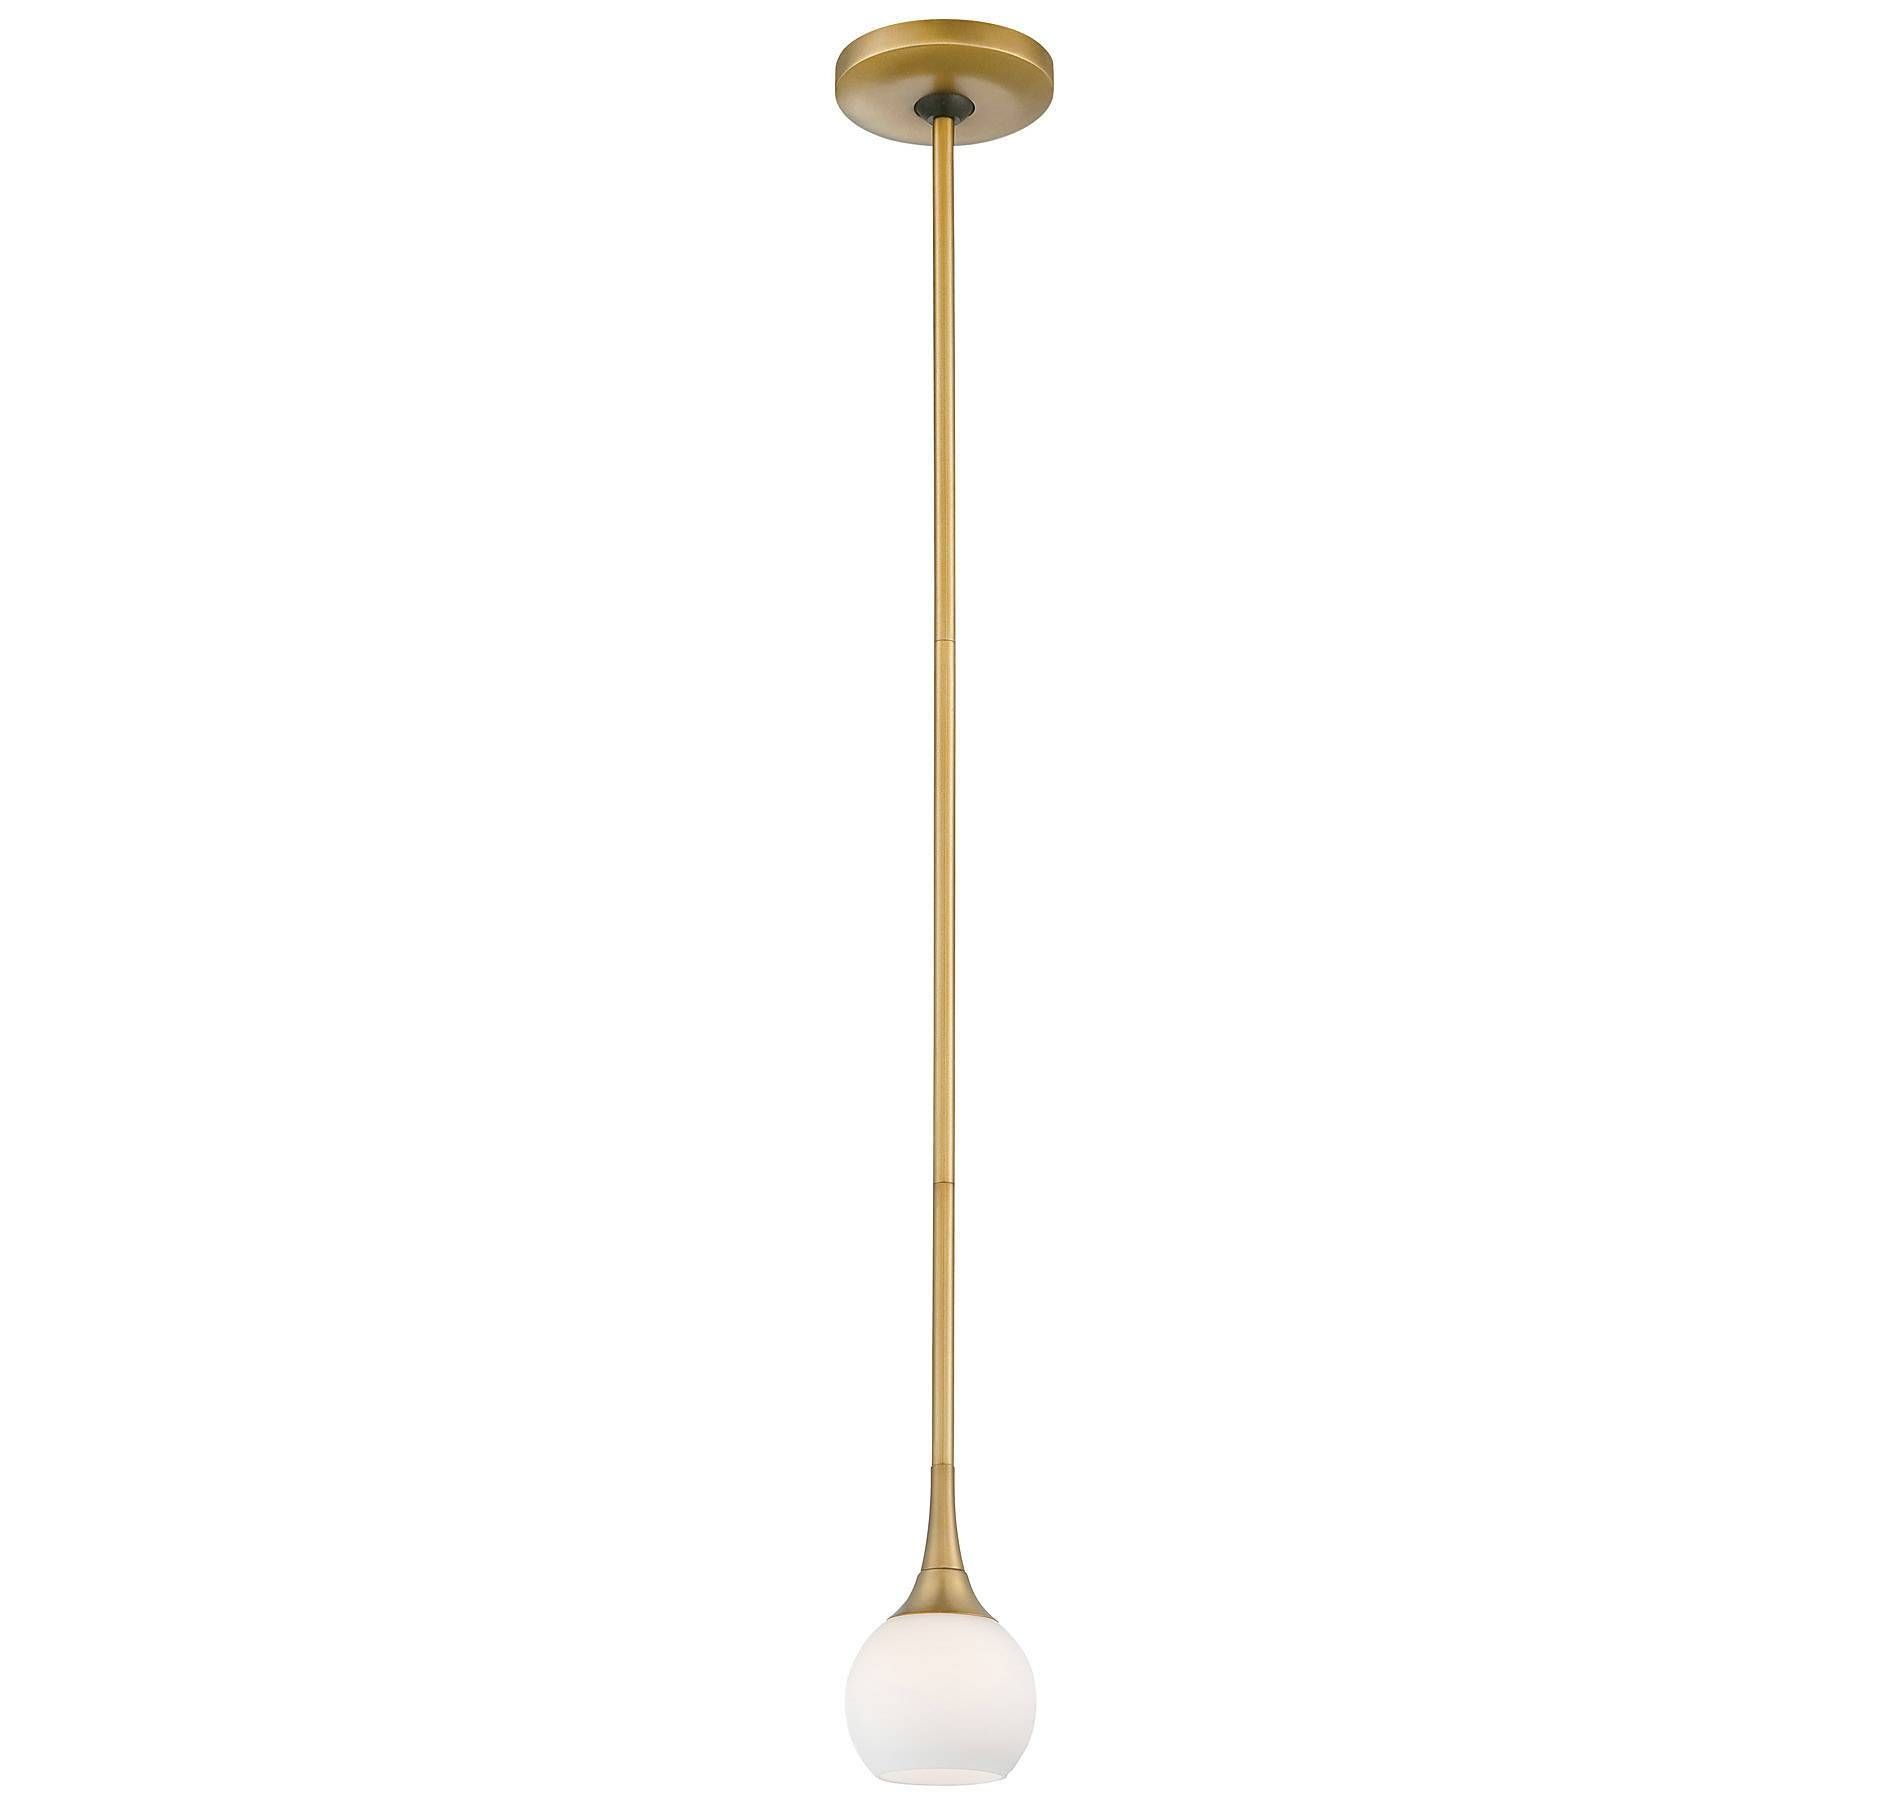 George Kovacs P1801 248 Pontil 1 Light Mini Pendant In Honey Gold With George Kovacs Pendants (View 7 of 15)